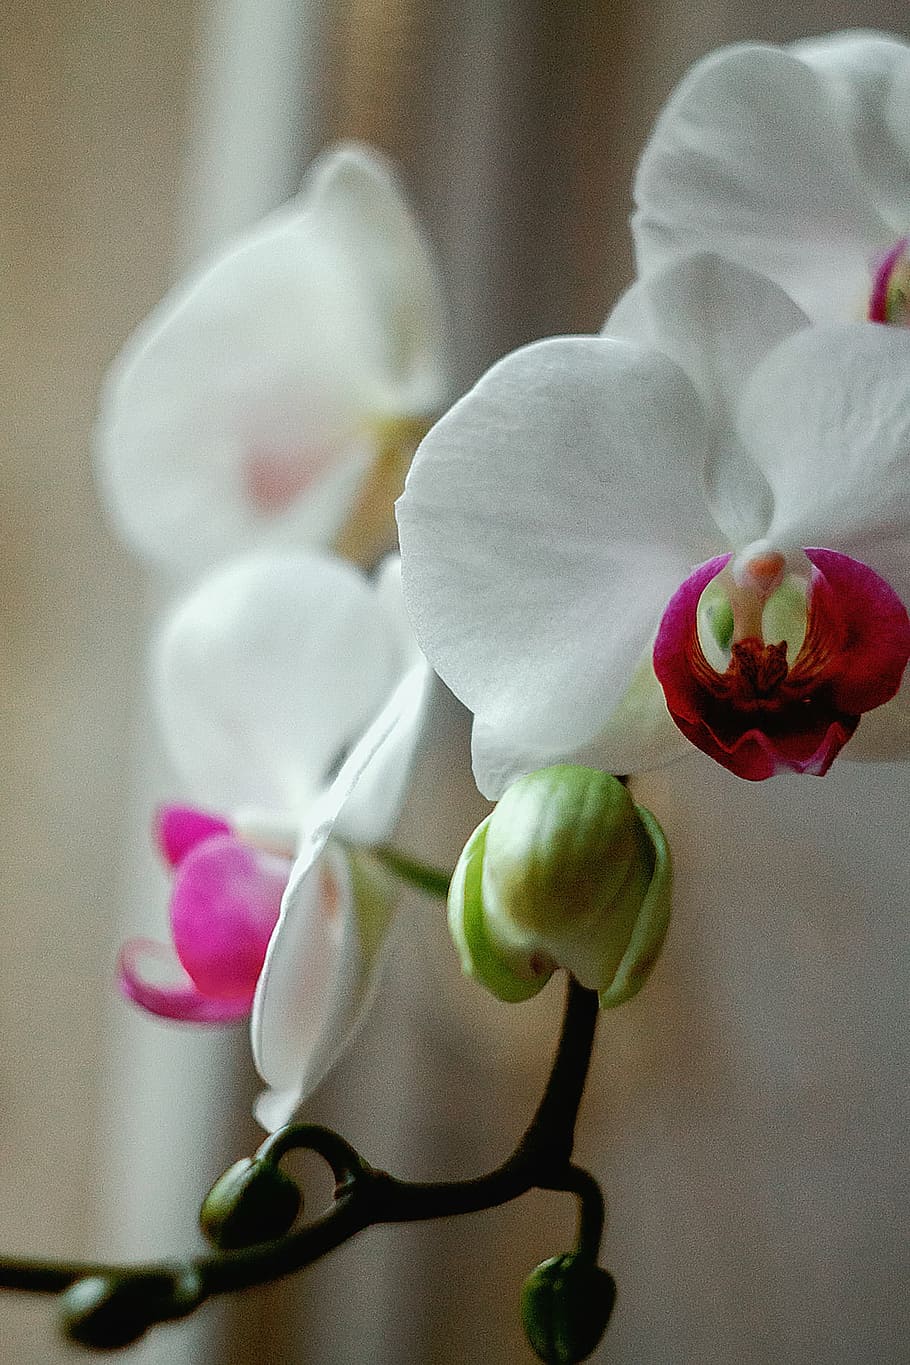 close, phot oof, white, red, moth orchids, bloom, nature, plants, stem, flowers